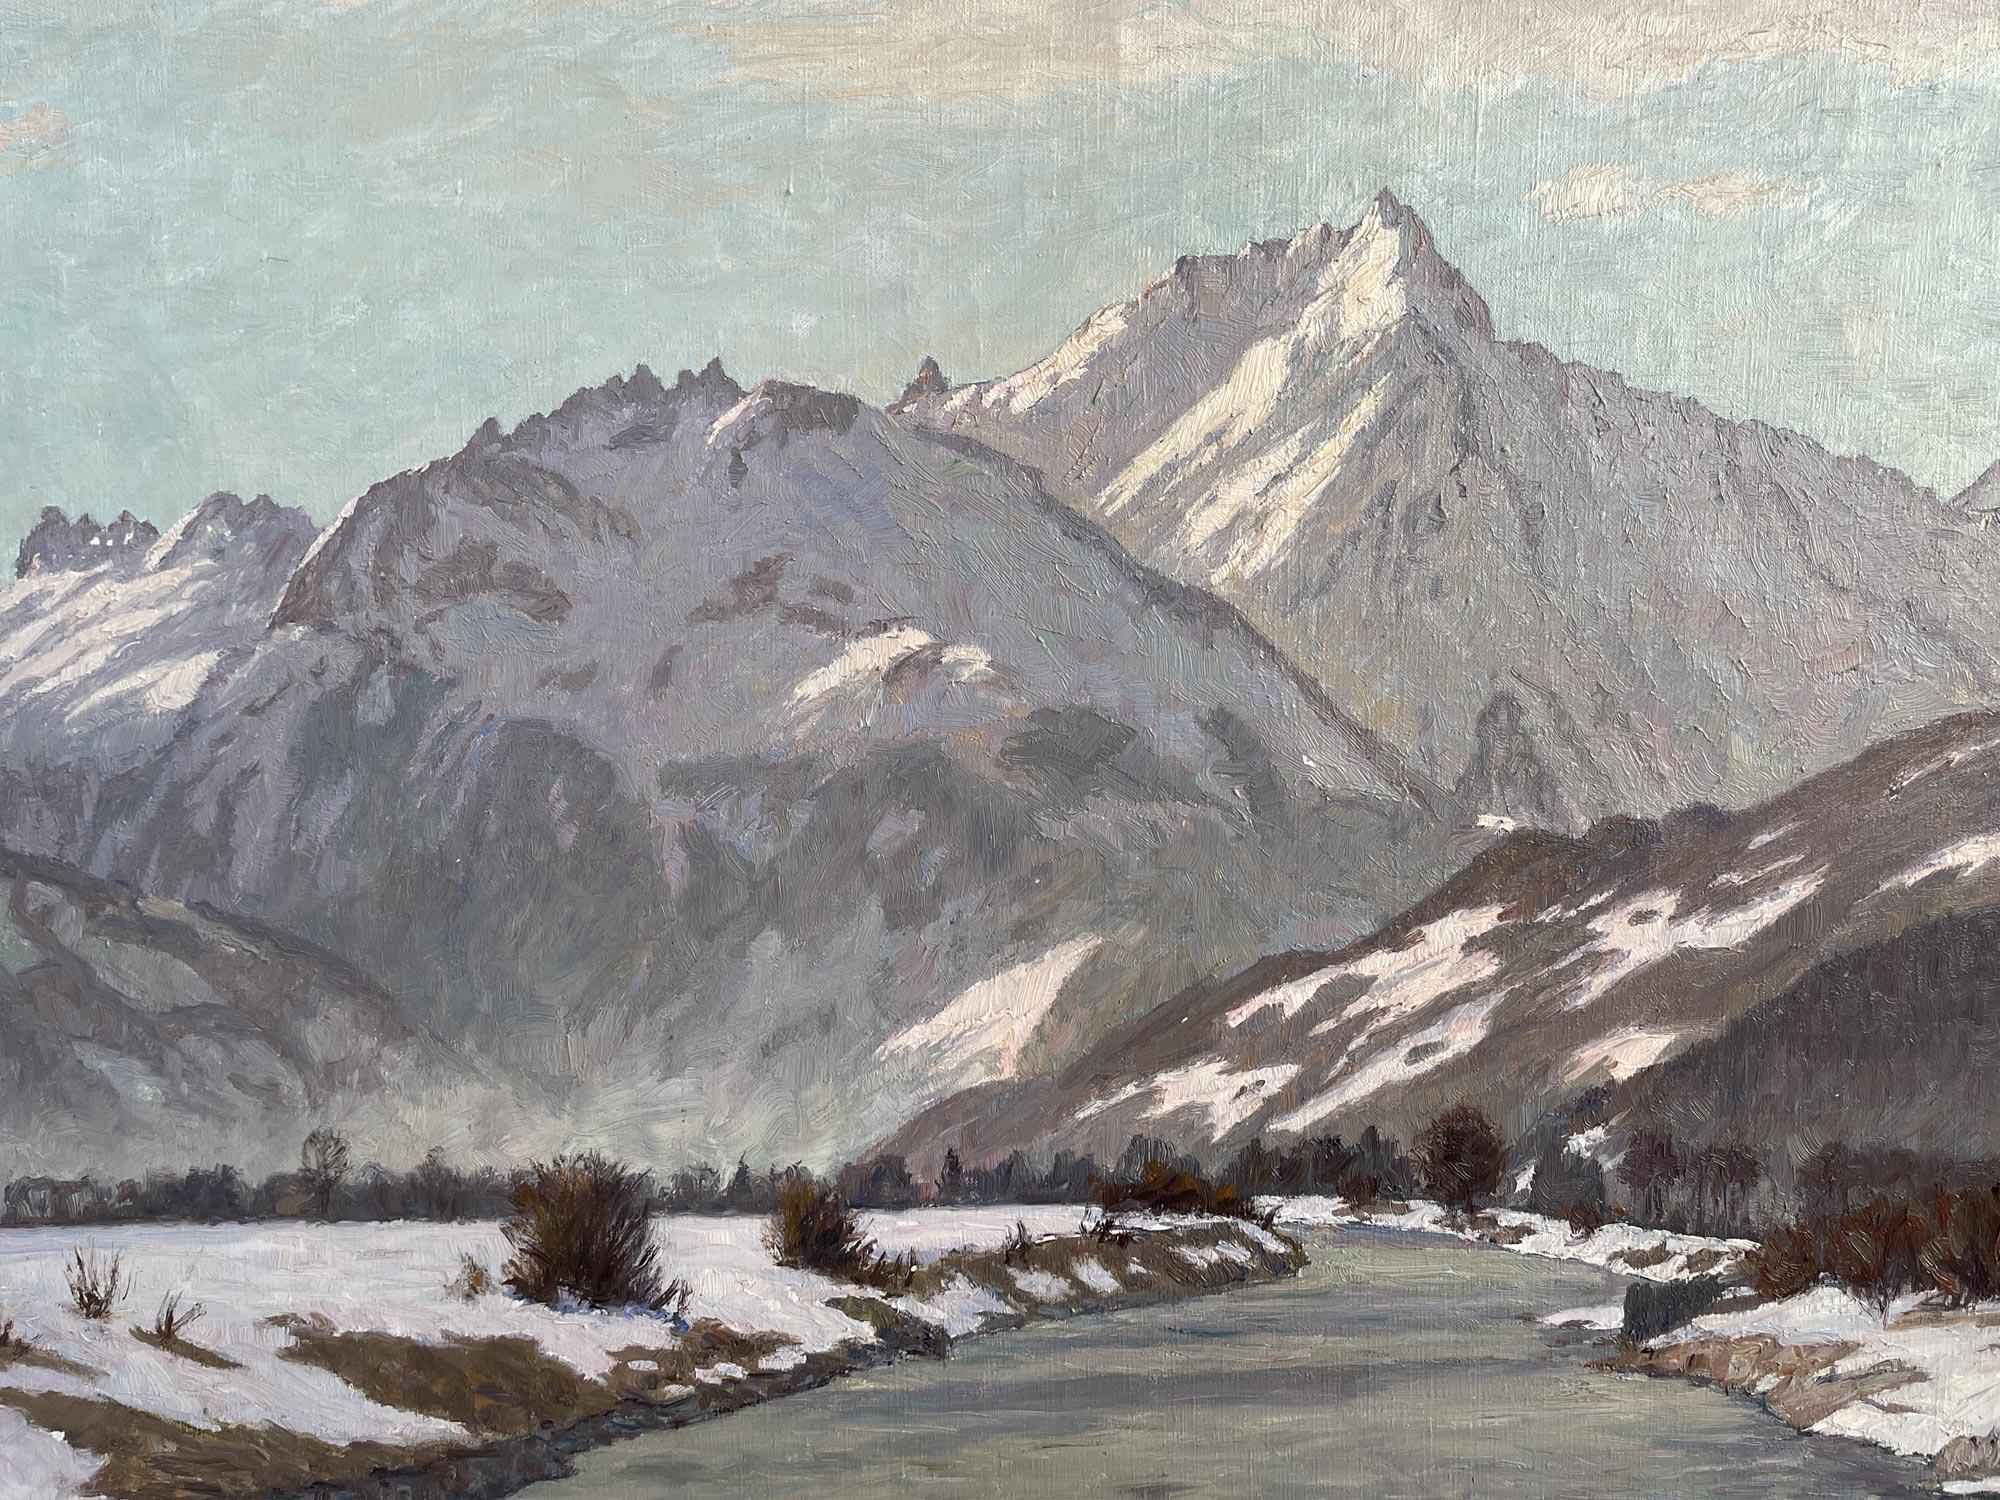 Italian Snowy Landscape Oil On Canvas by Alex Weise - Dolomites 1930 For Sale